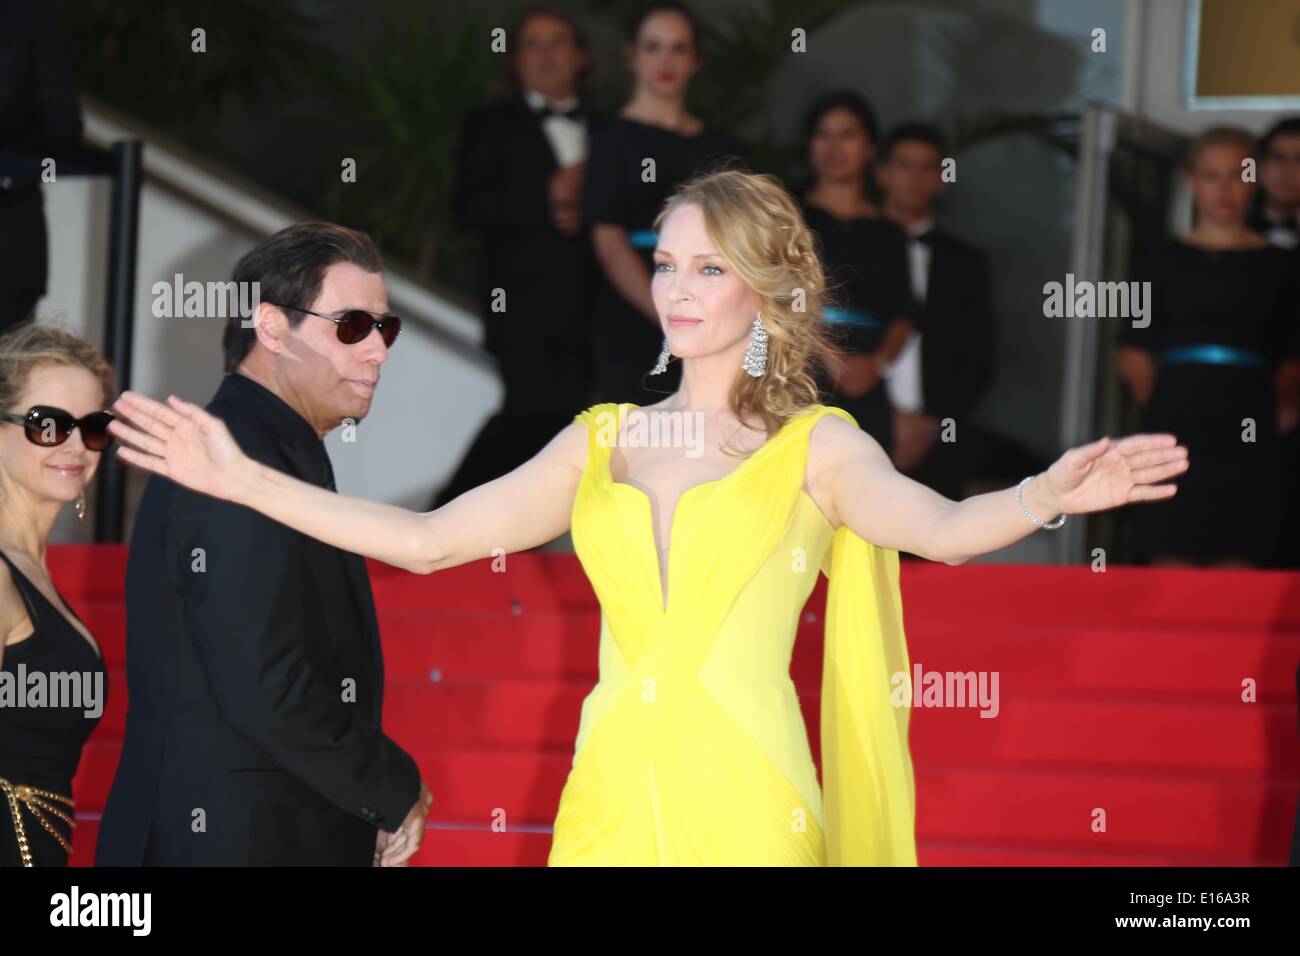 Cannes, France. 23rd May, 2014. Actors John Travolta (L) and Uma Thurman attend the premiere of 'Sils Maria' during the 67th Cannes International Film Festival at Palais des Festivals in Cannes, France, on 23 May 2014. Photo: Hubert Boesl -NO WIRE SERVICE- Credit:  dpa picture alliance/Alamy Live News Stock Photo